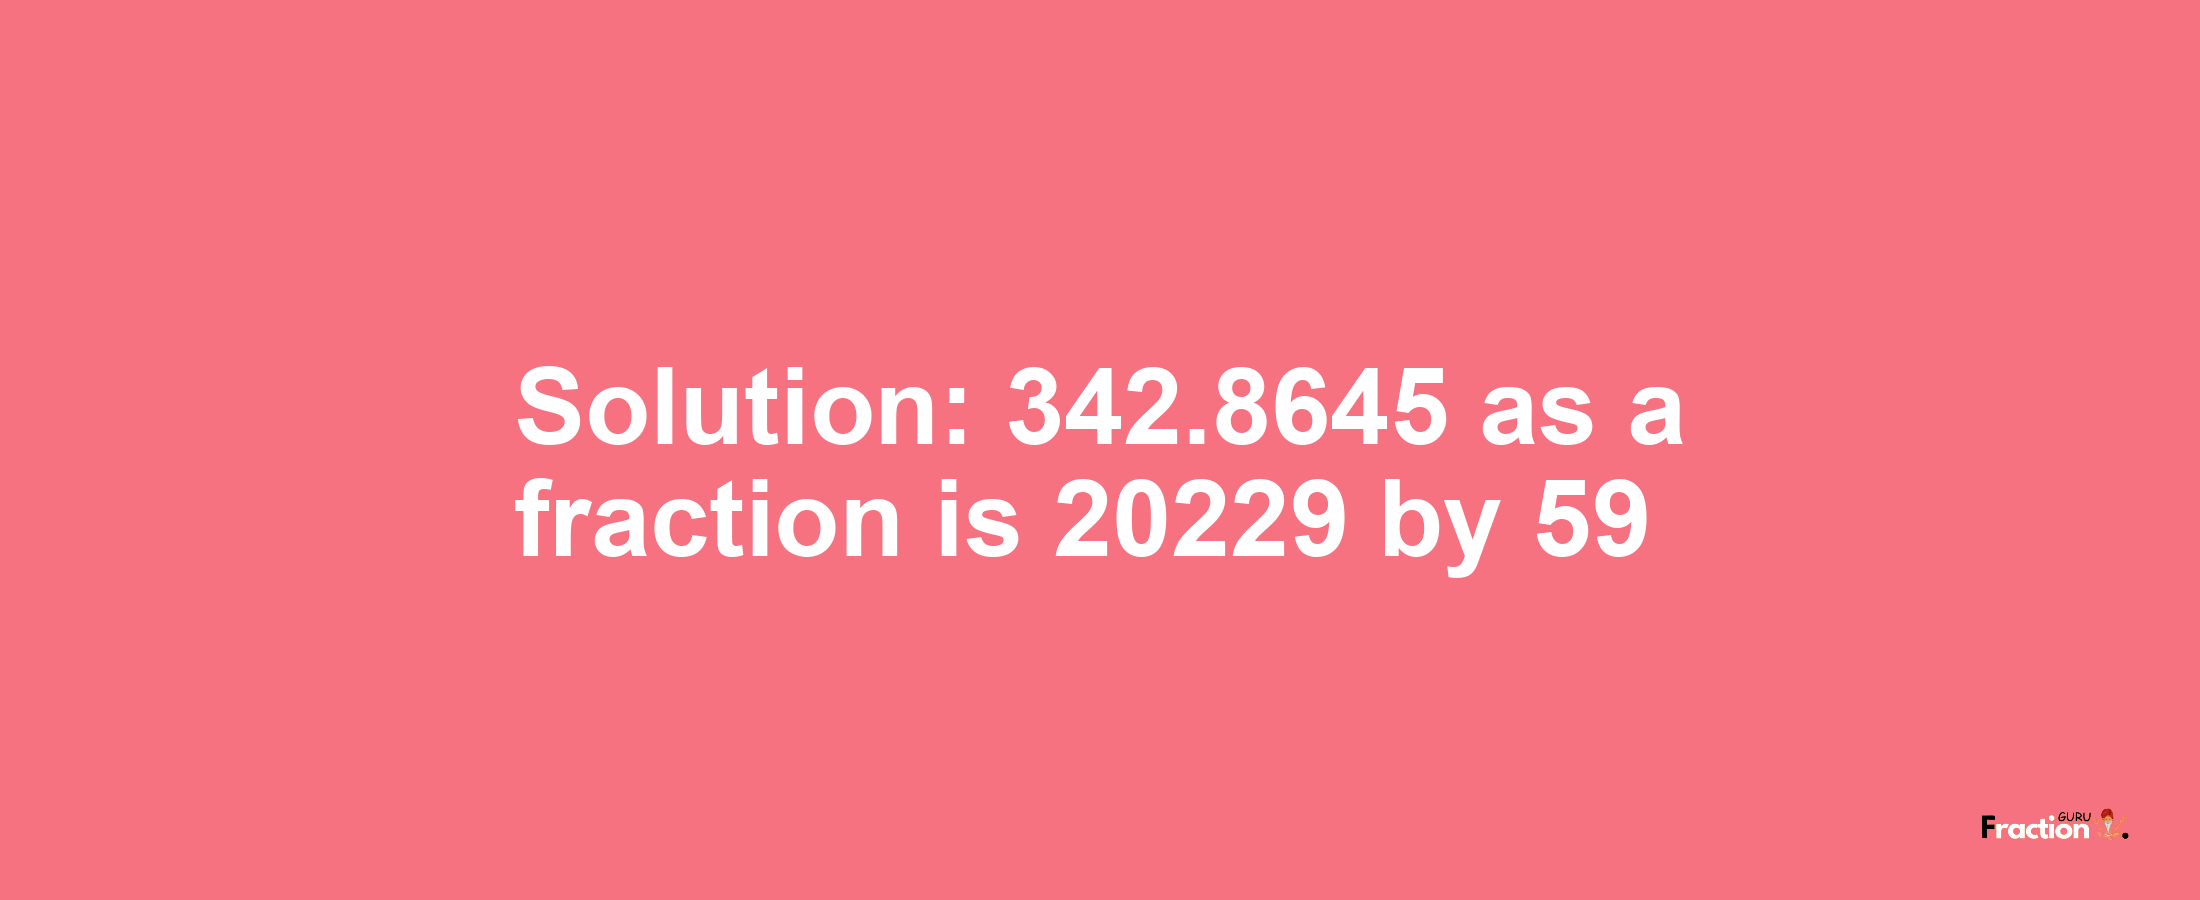 Solution:342.8645 as a fraction is 20229/59